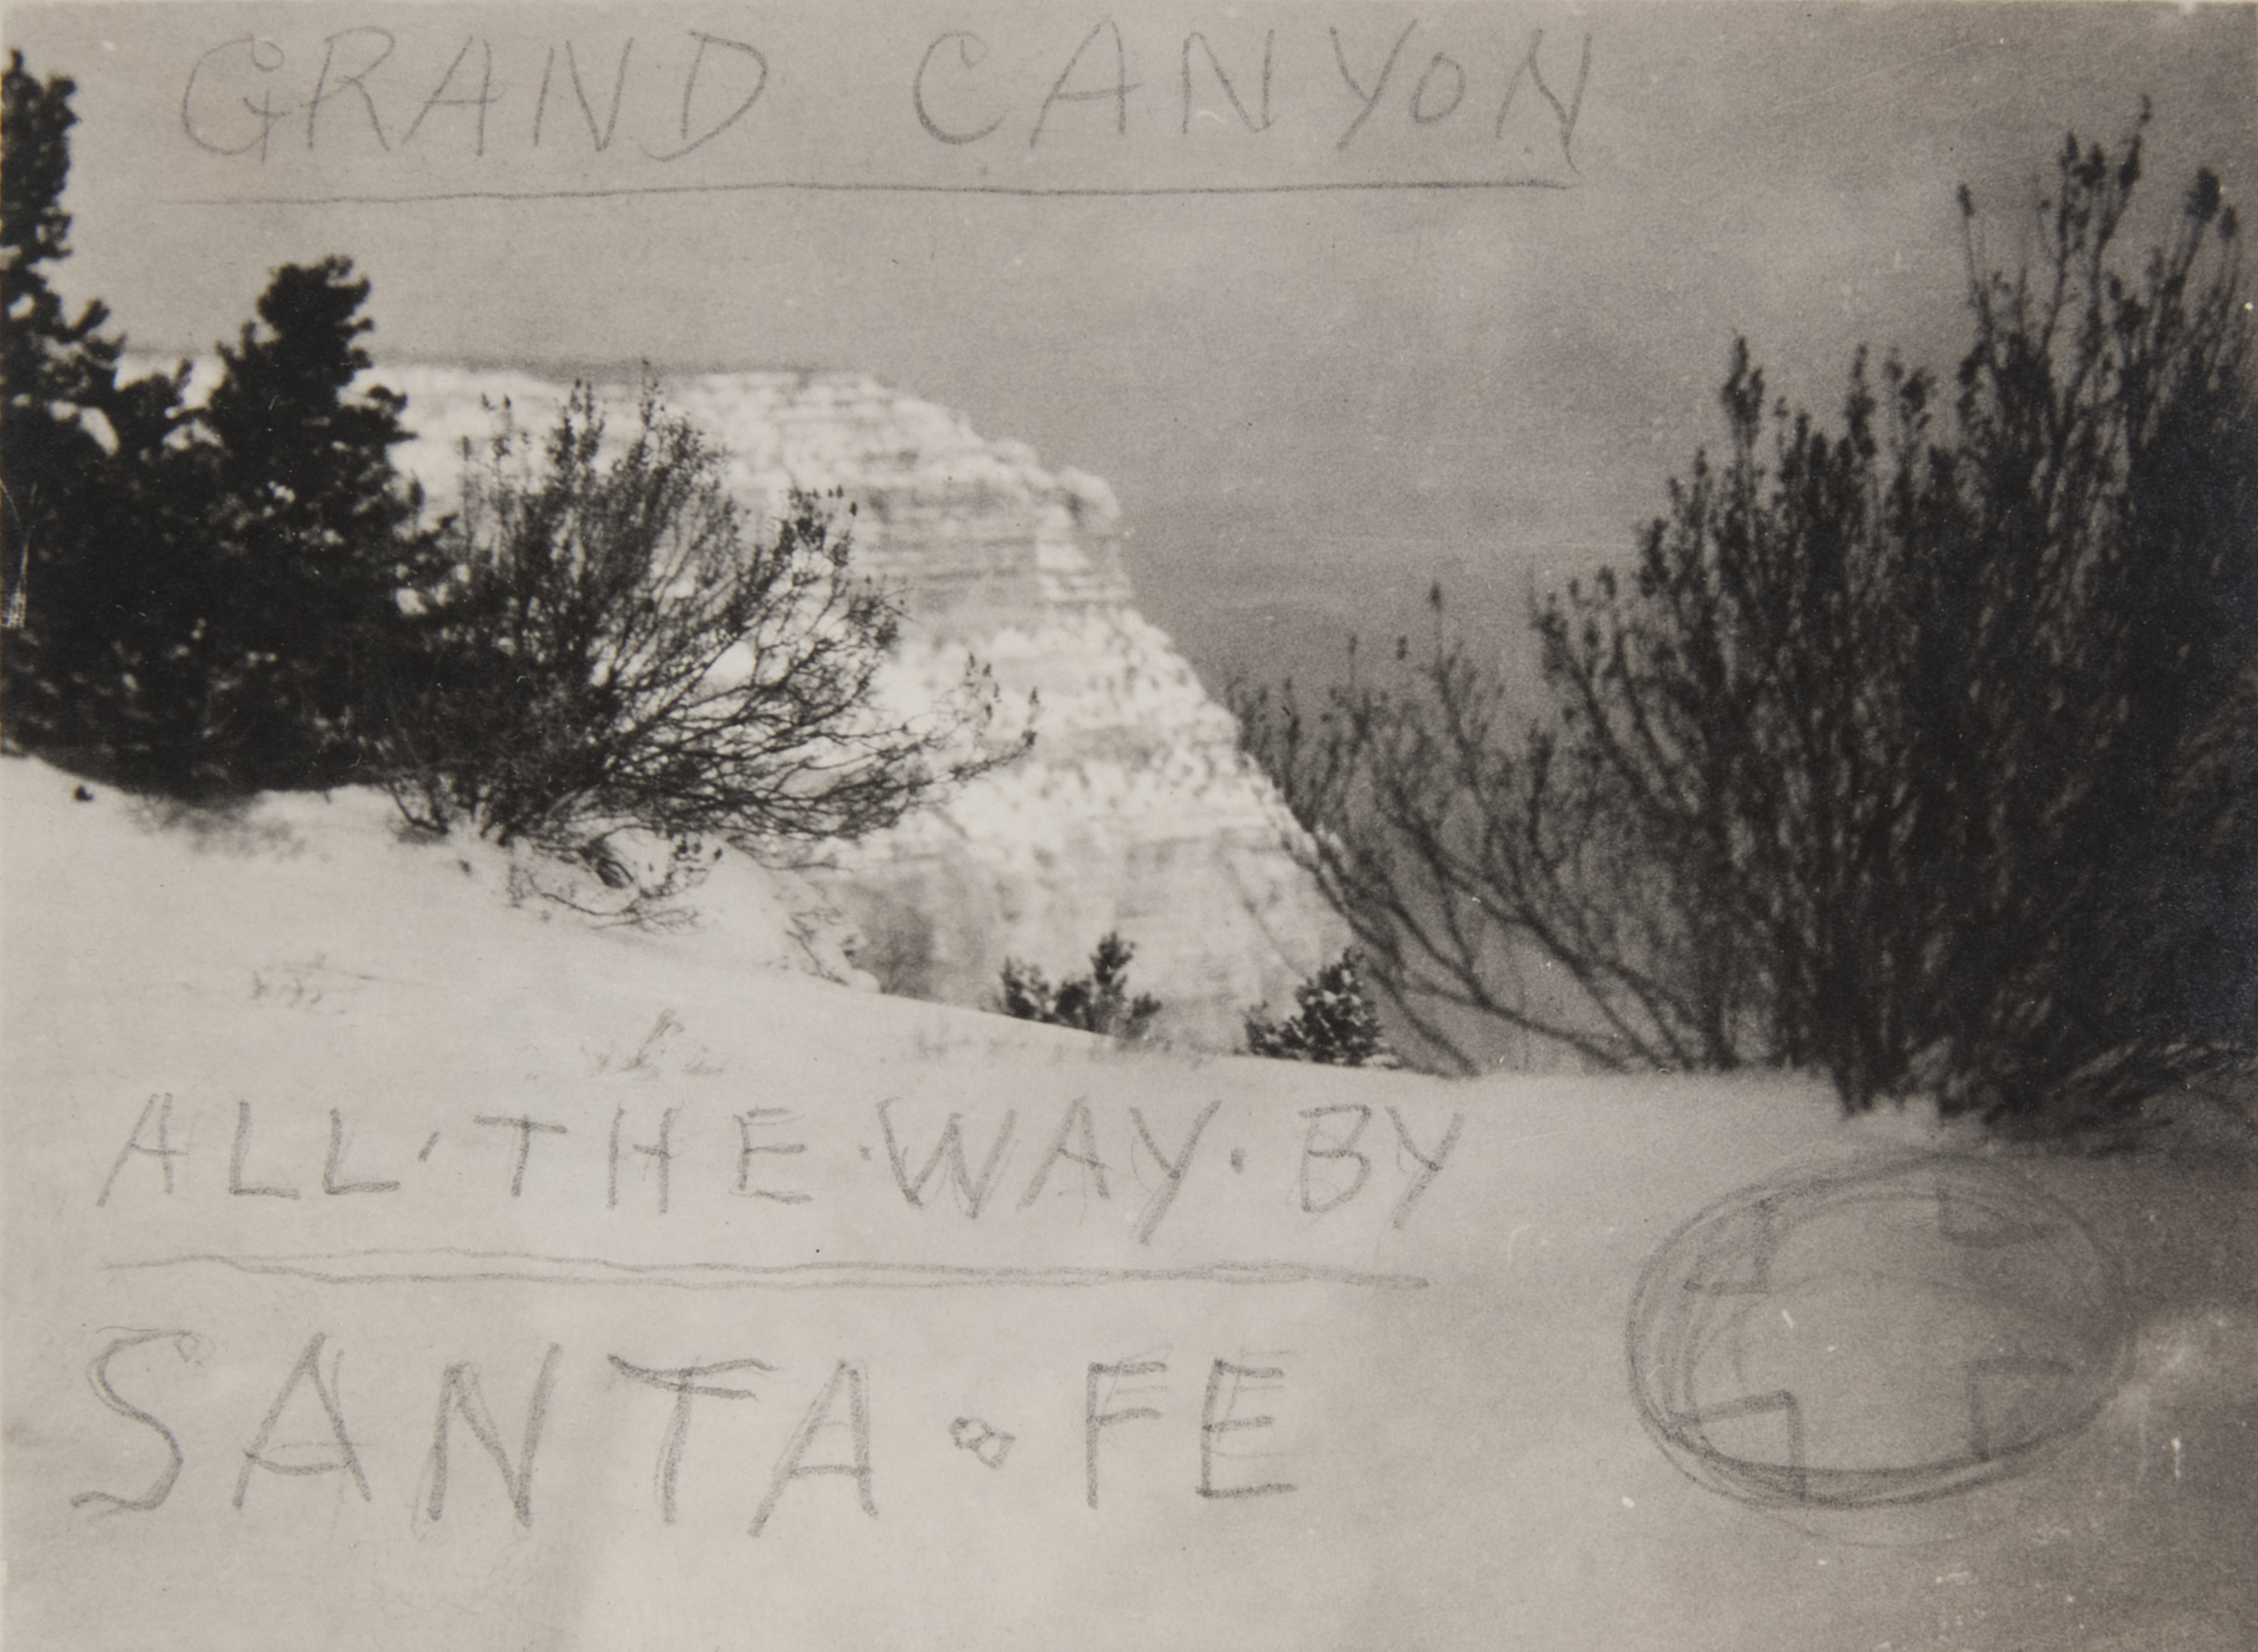 Grand Canyon, all the way by Sante Fe